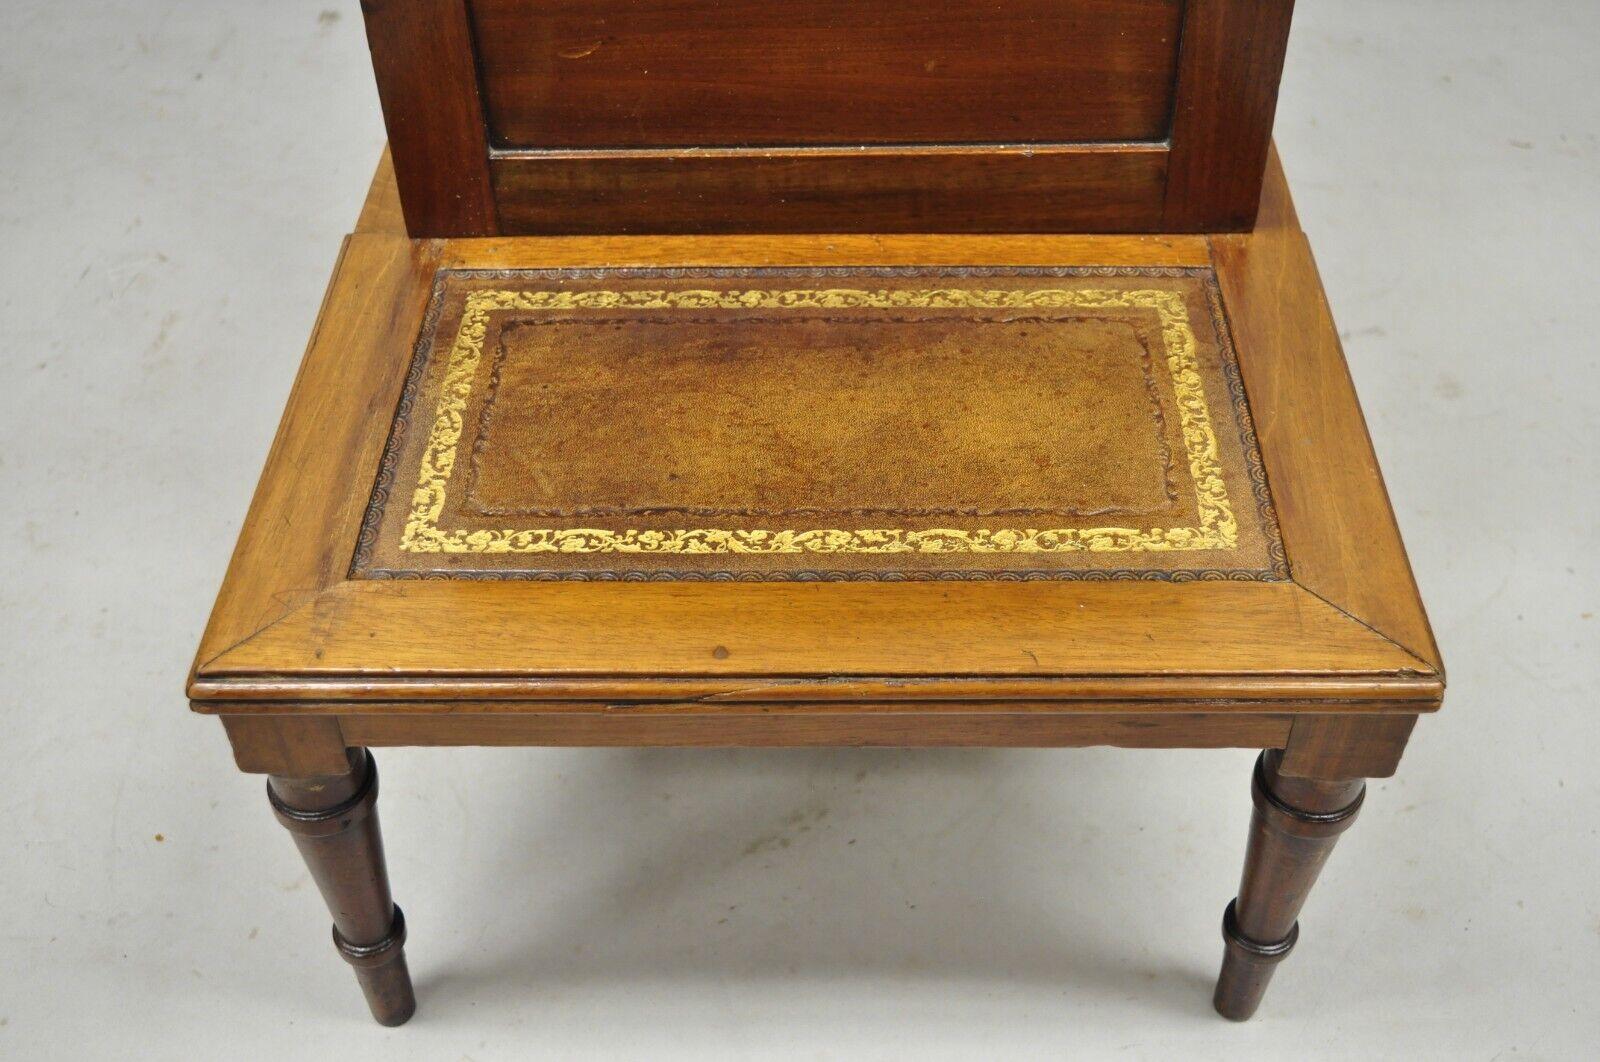 Antique English Regency Leather Top 3 Tier Side Table with Hidden Storage For Sale 8